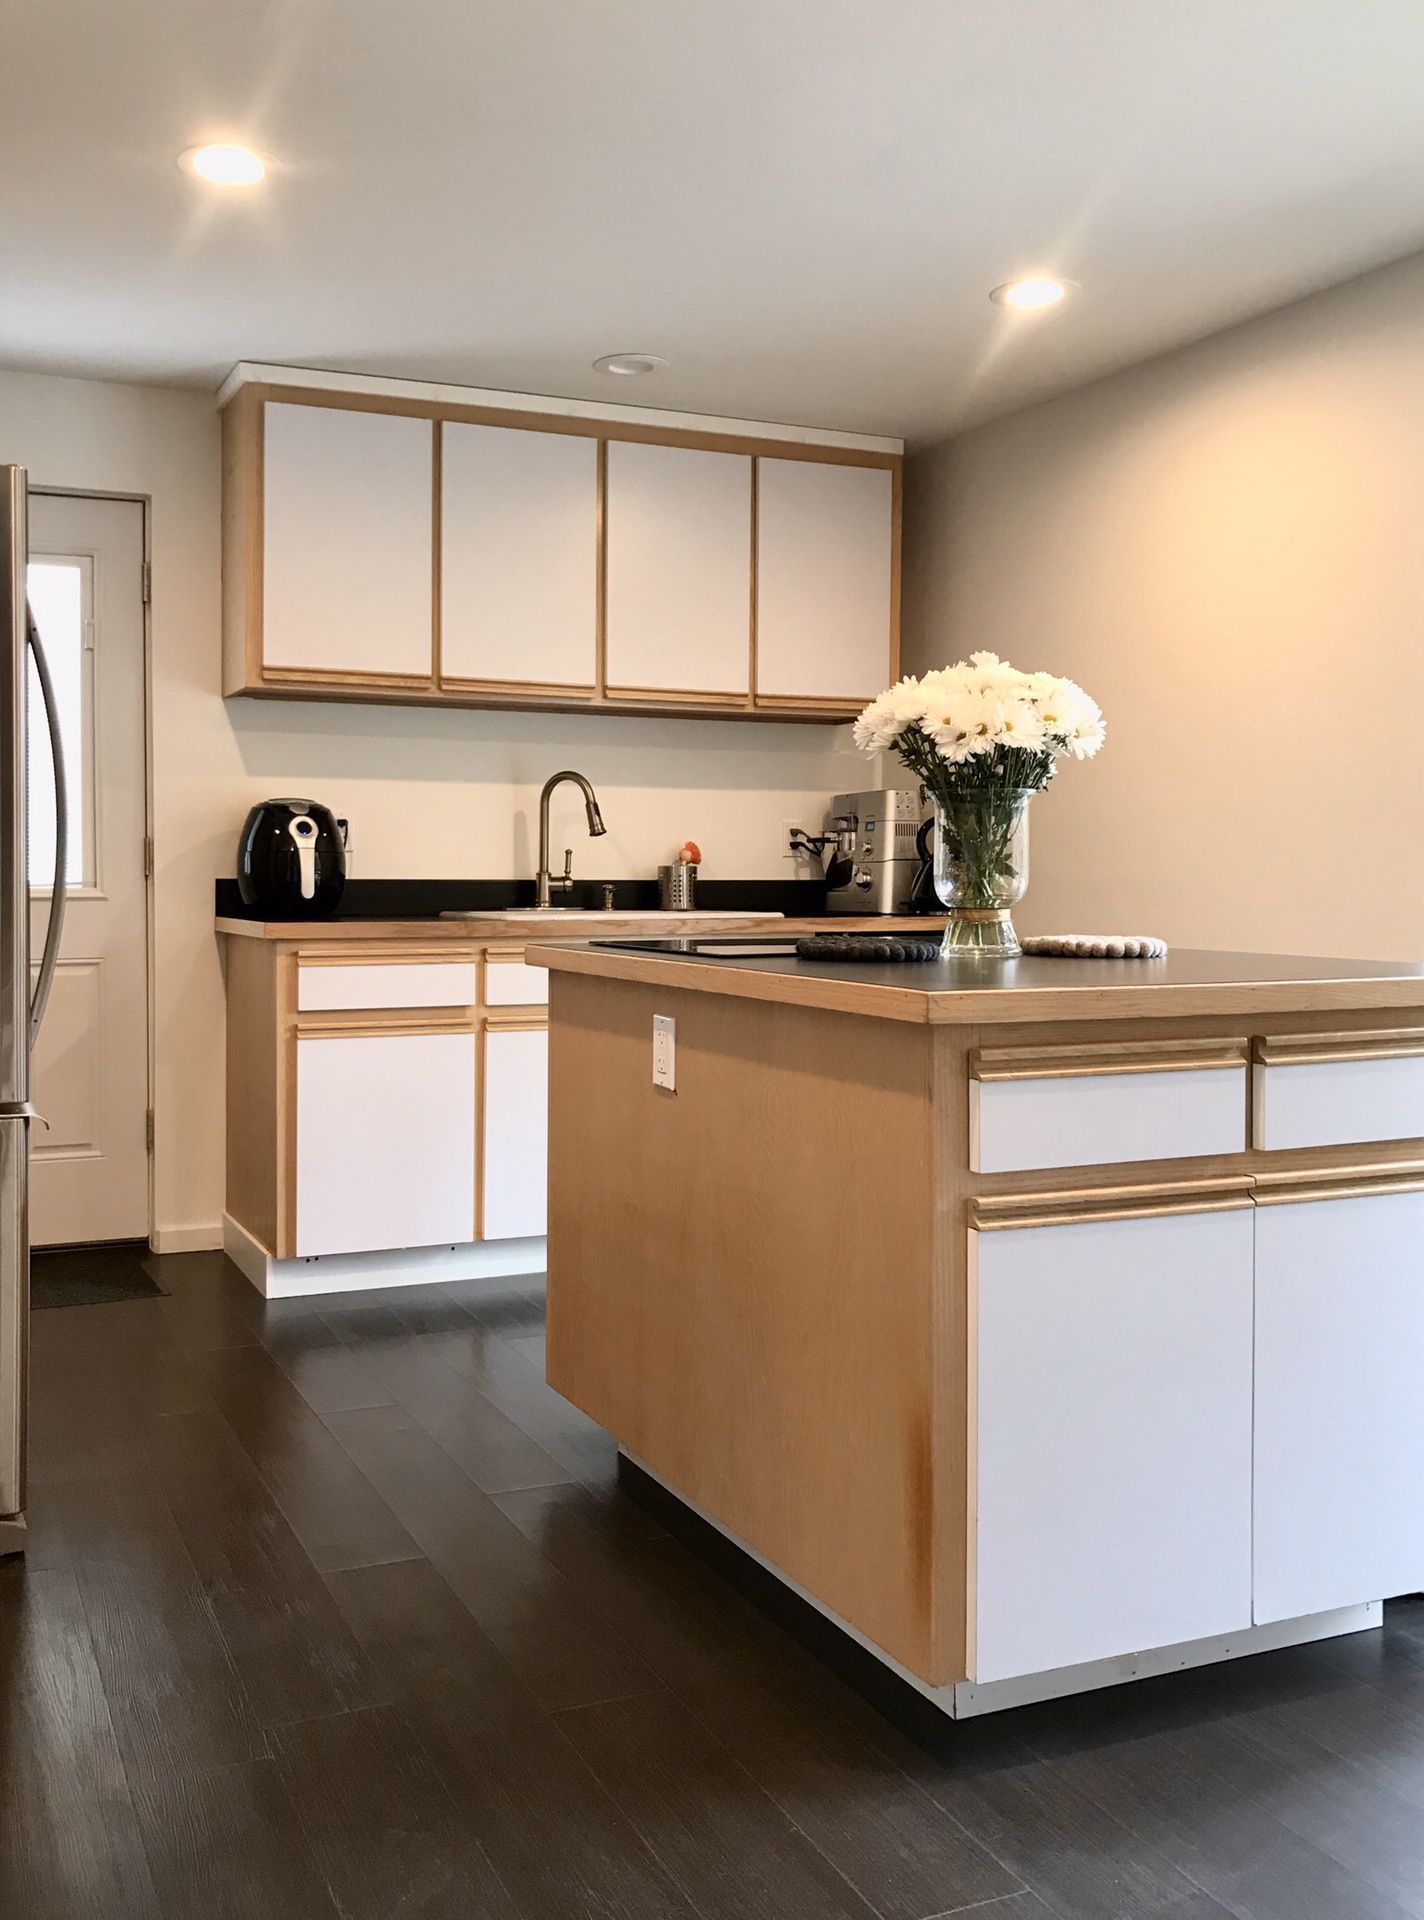 KITCHEN CABINETS + COUNTERTOPS